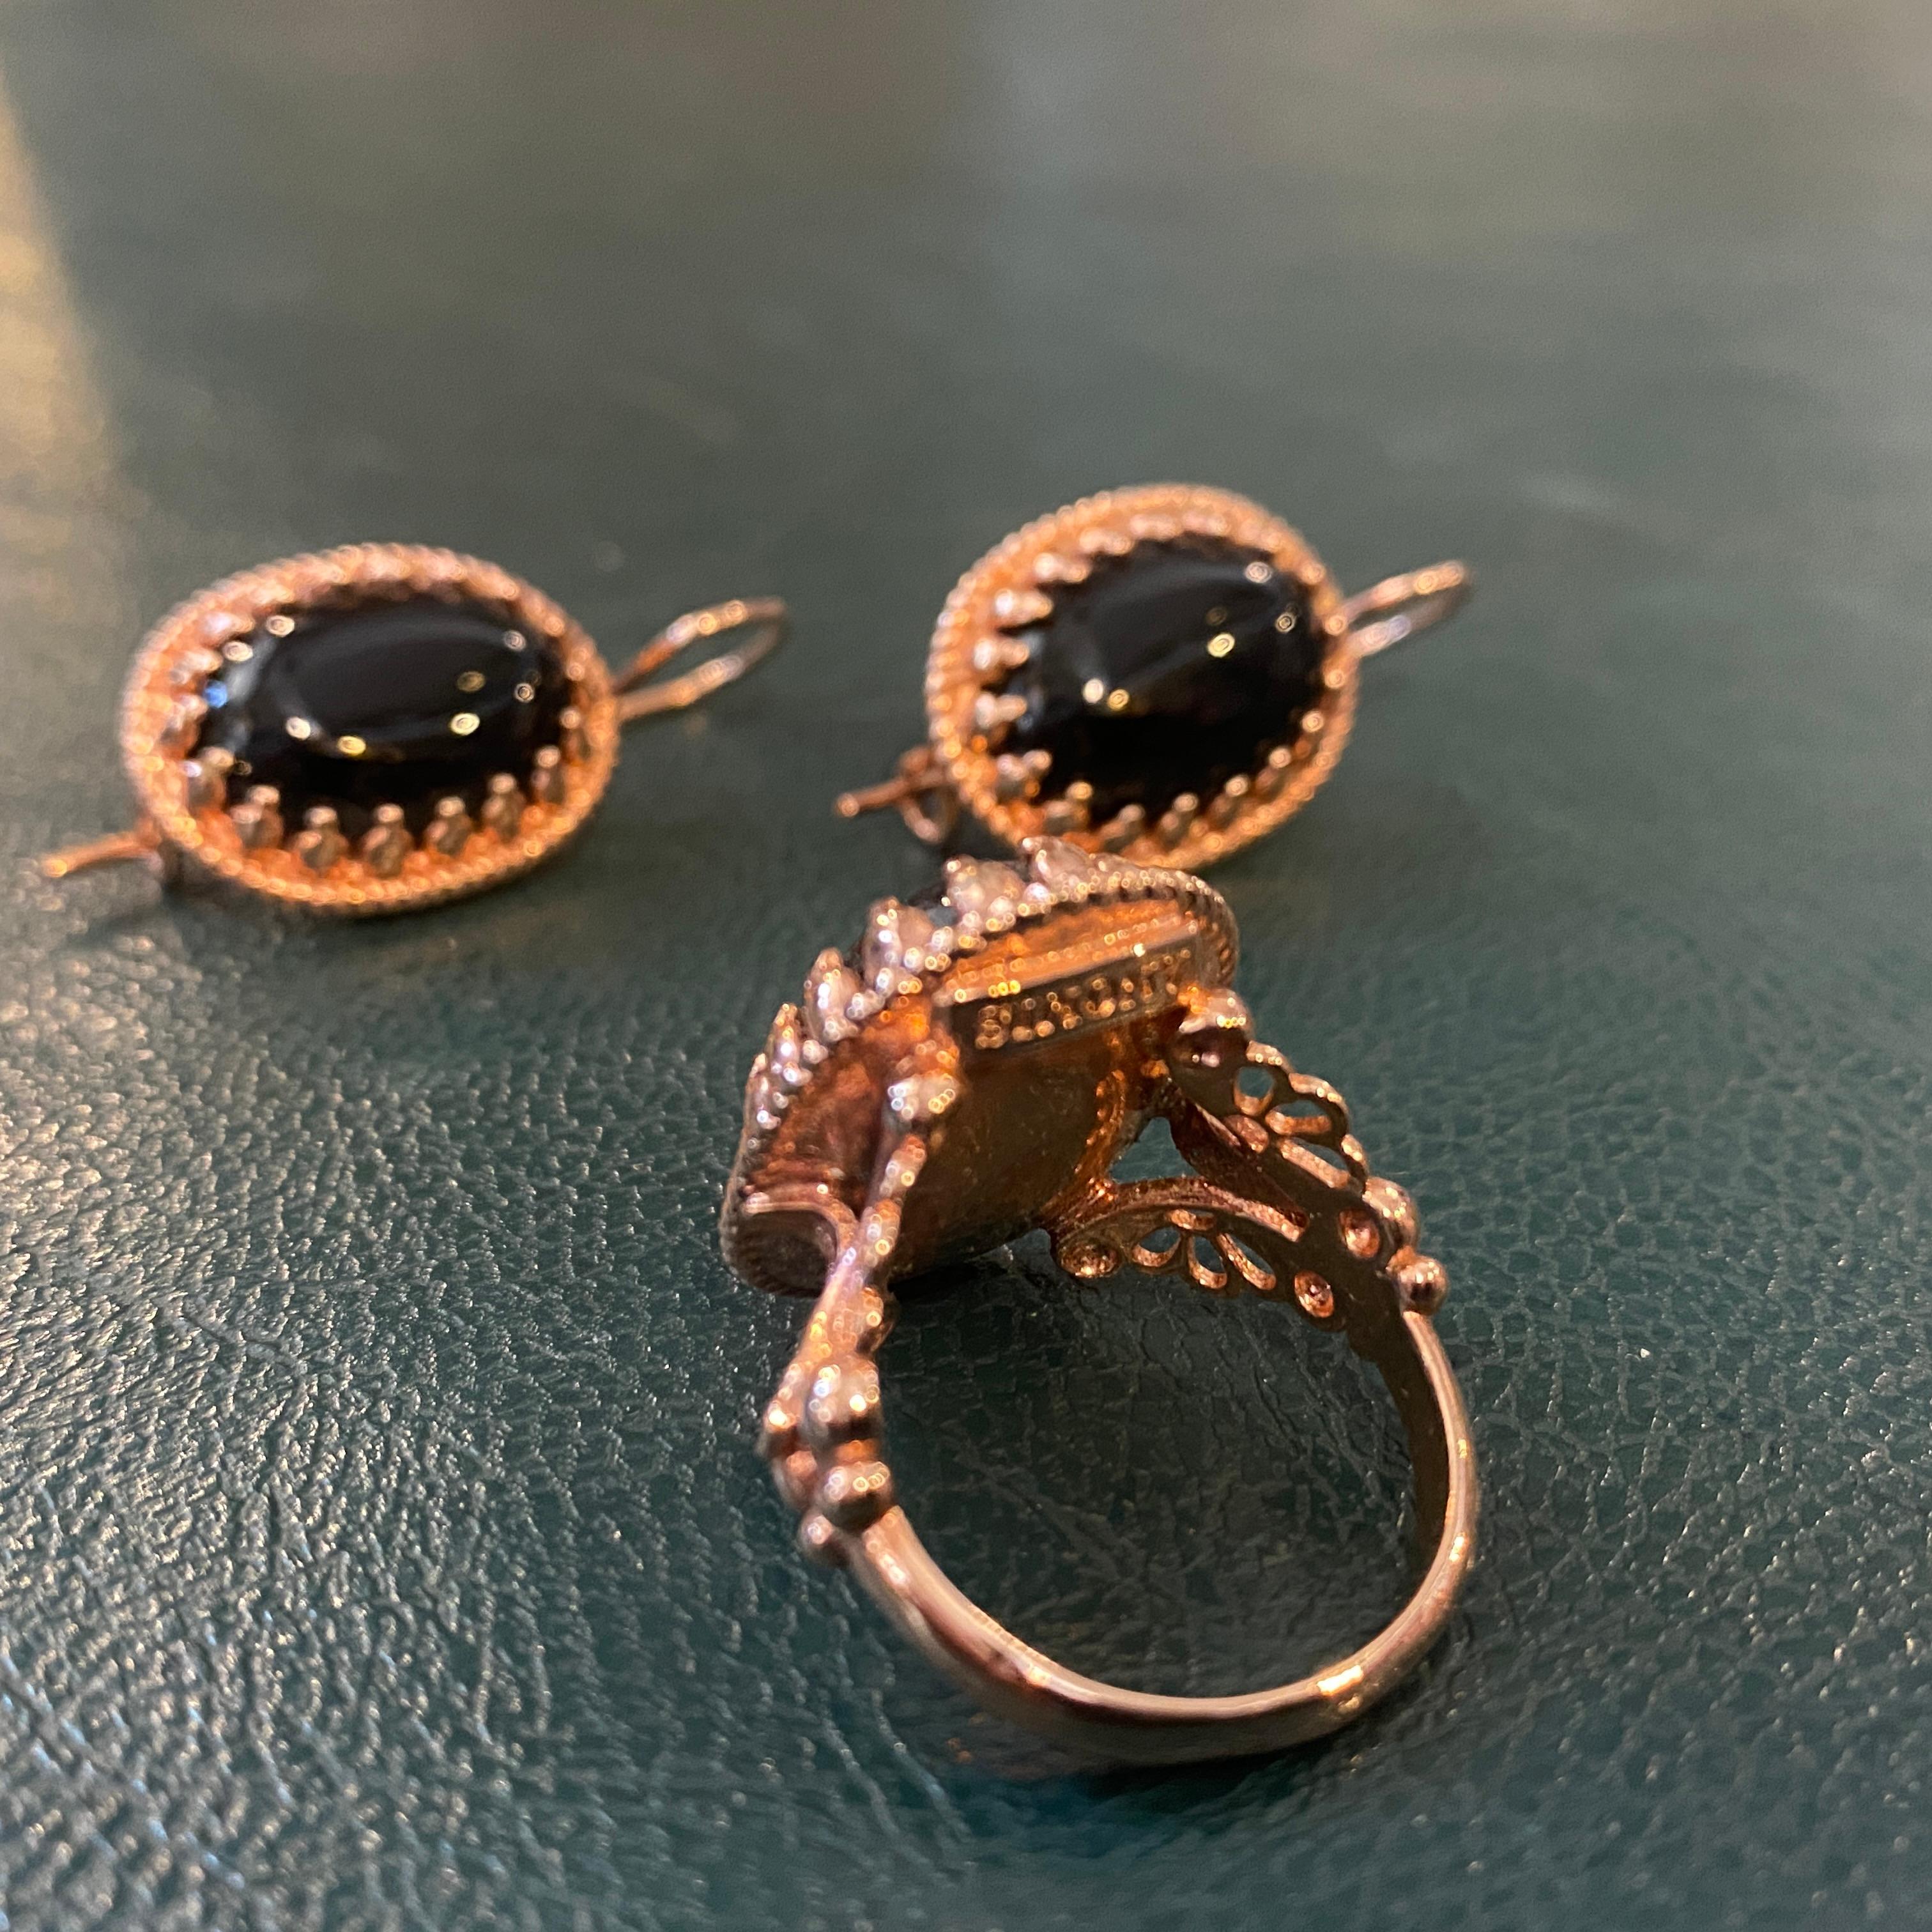 A never worn lovely parure composed by a brass and oval onyx cabochon ring and a pair of earrings designed and manufactured in Italy by Anomis